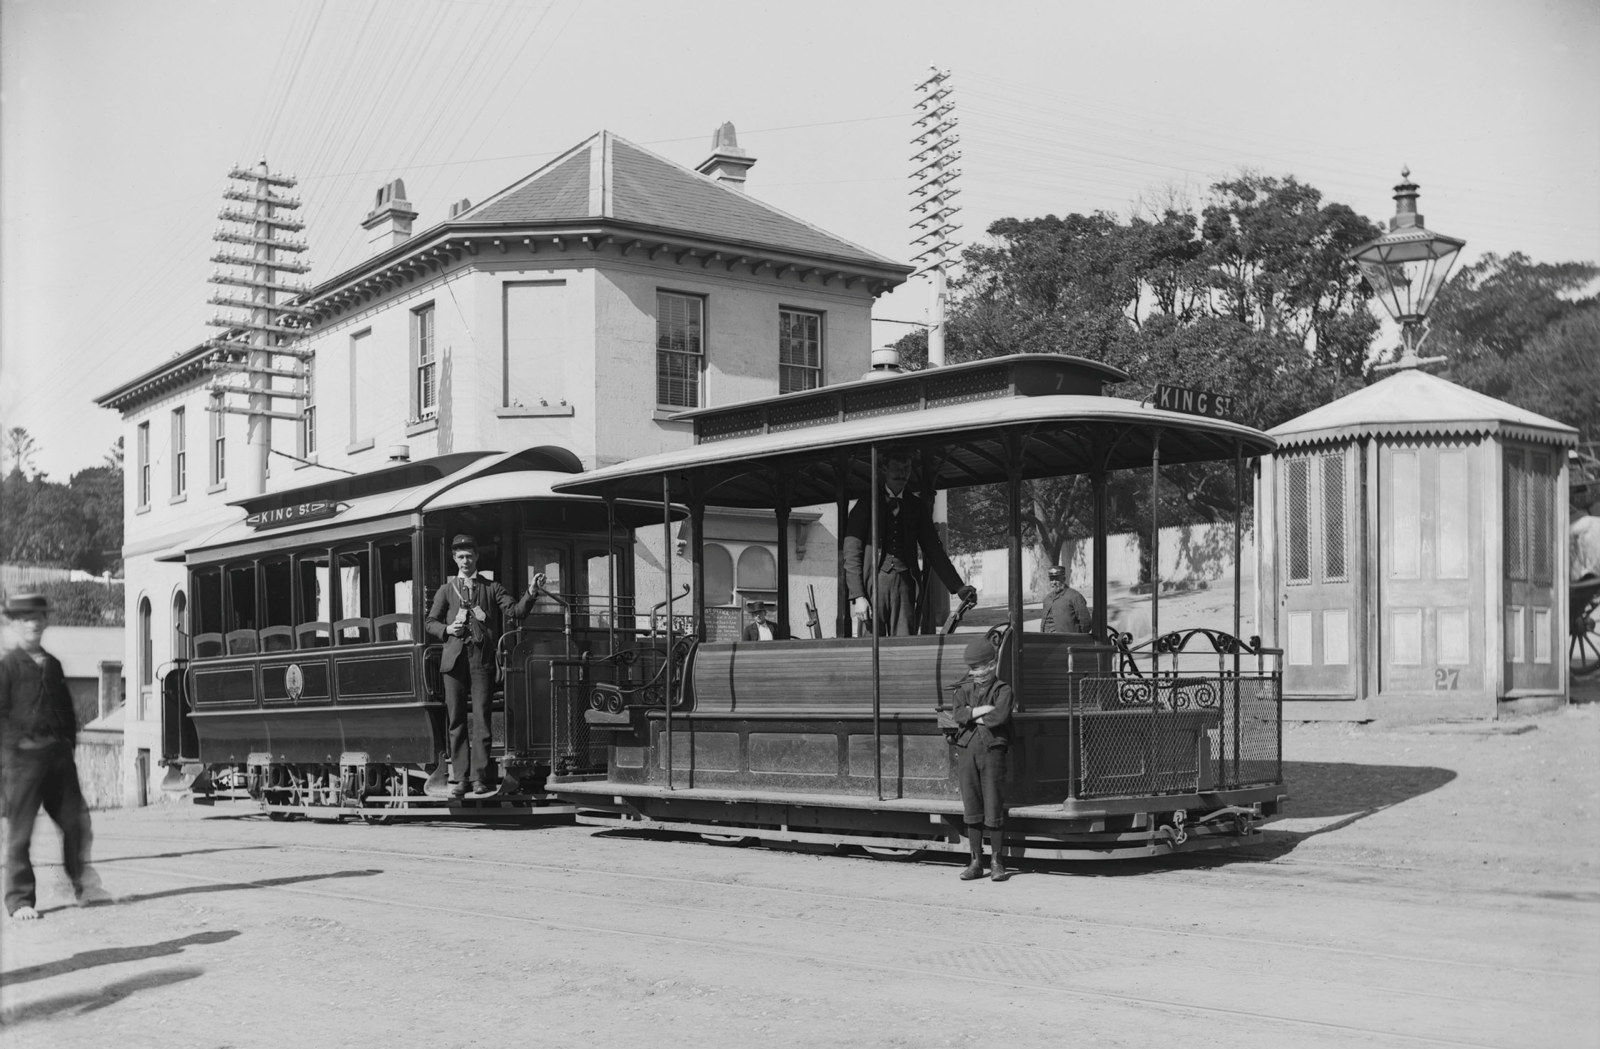 double carriage cable tram on the strret outside a Victorian building.